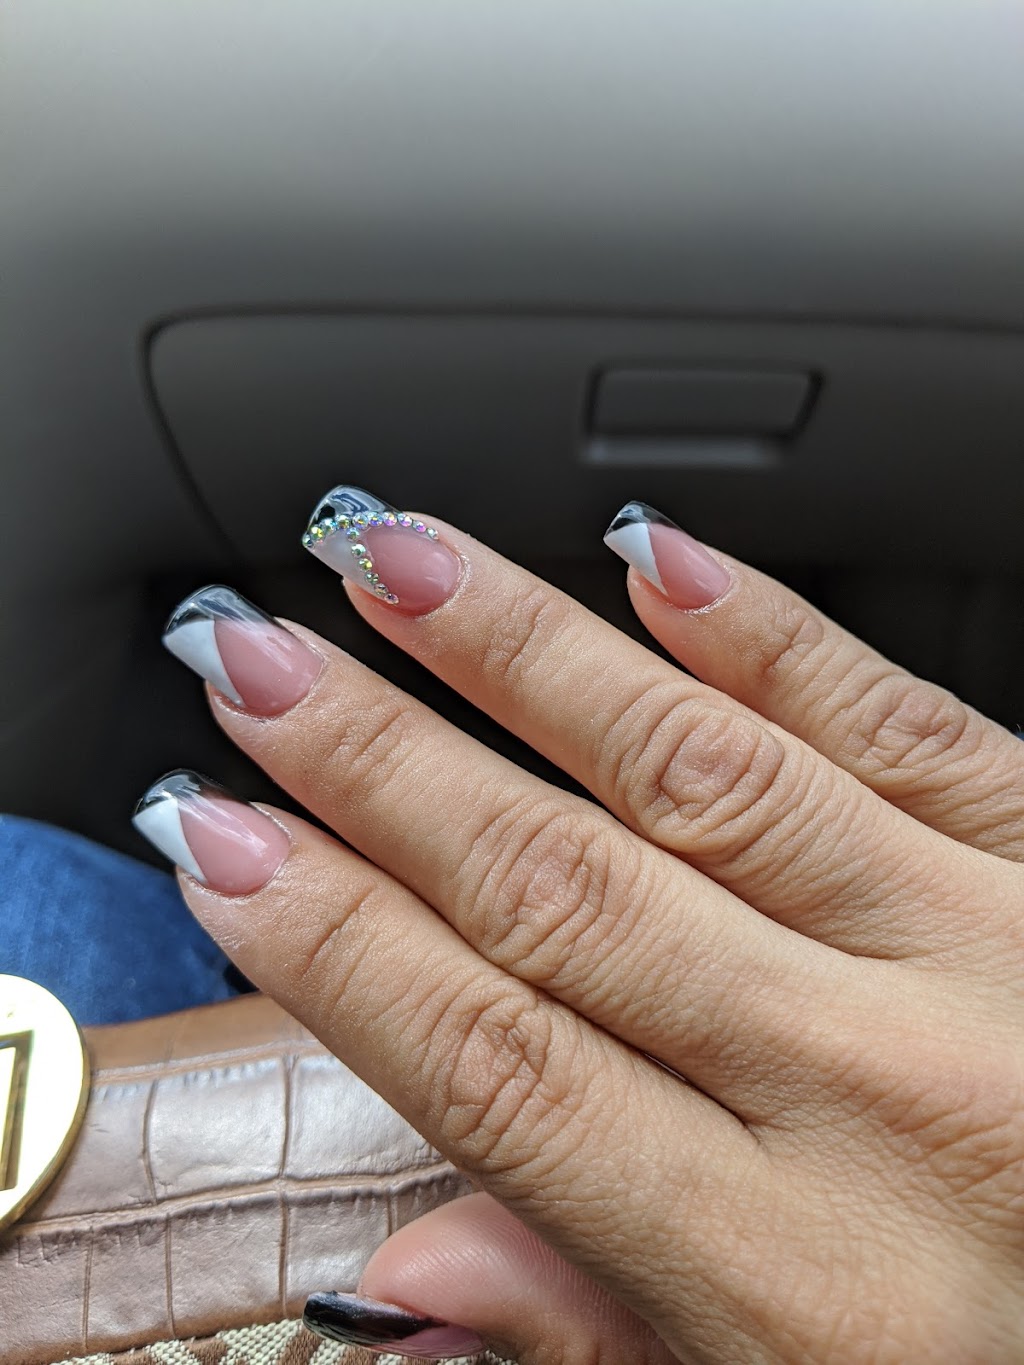 Abby Hair & Nails | 2919 Barker Cypress Rd Suite J, Houston, TX 77084 | Phone: (281) 492-9836